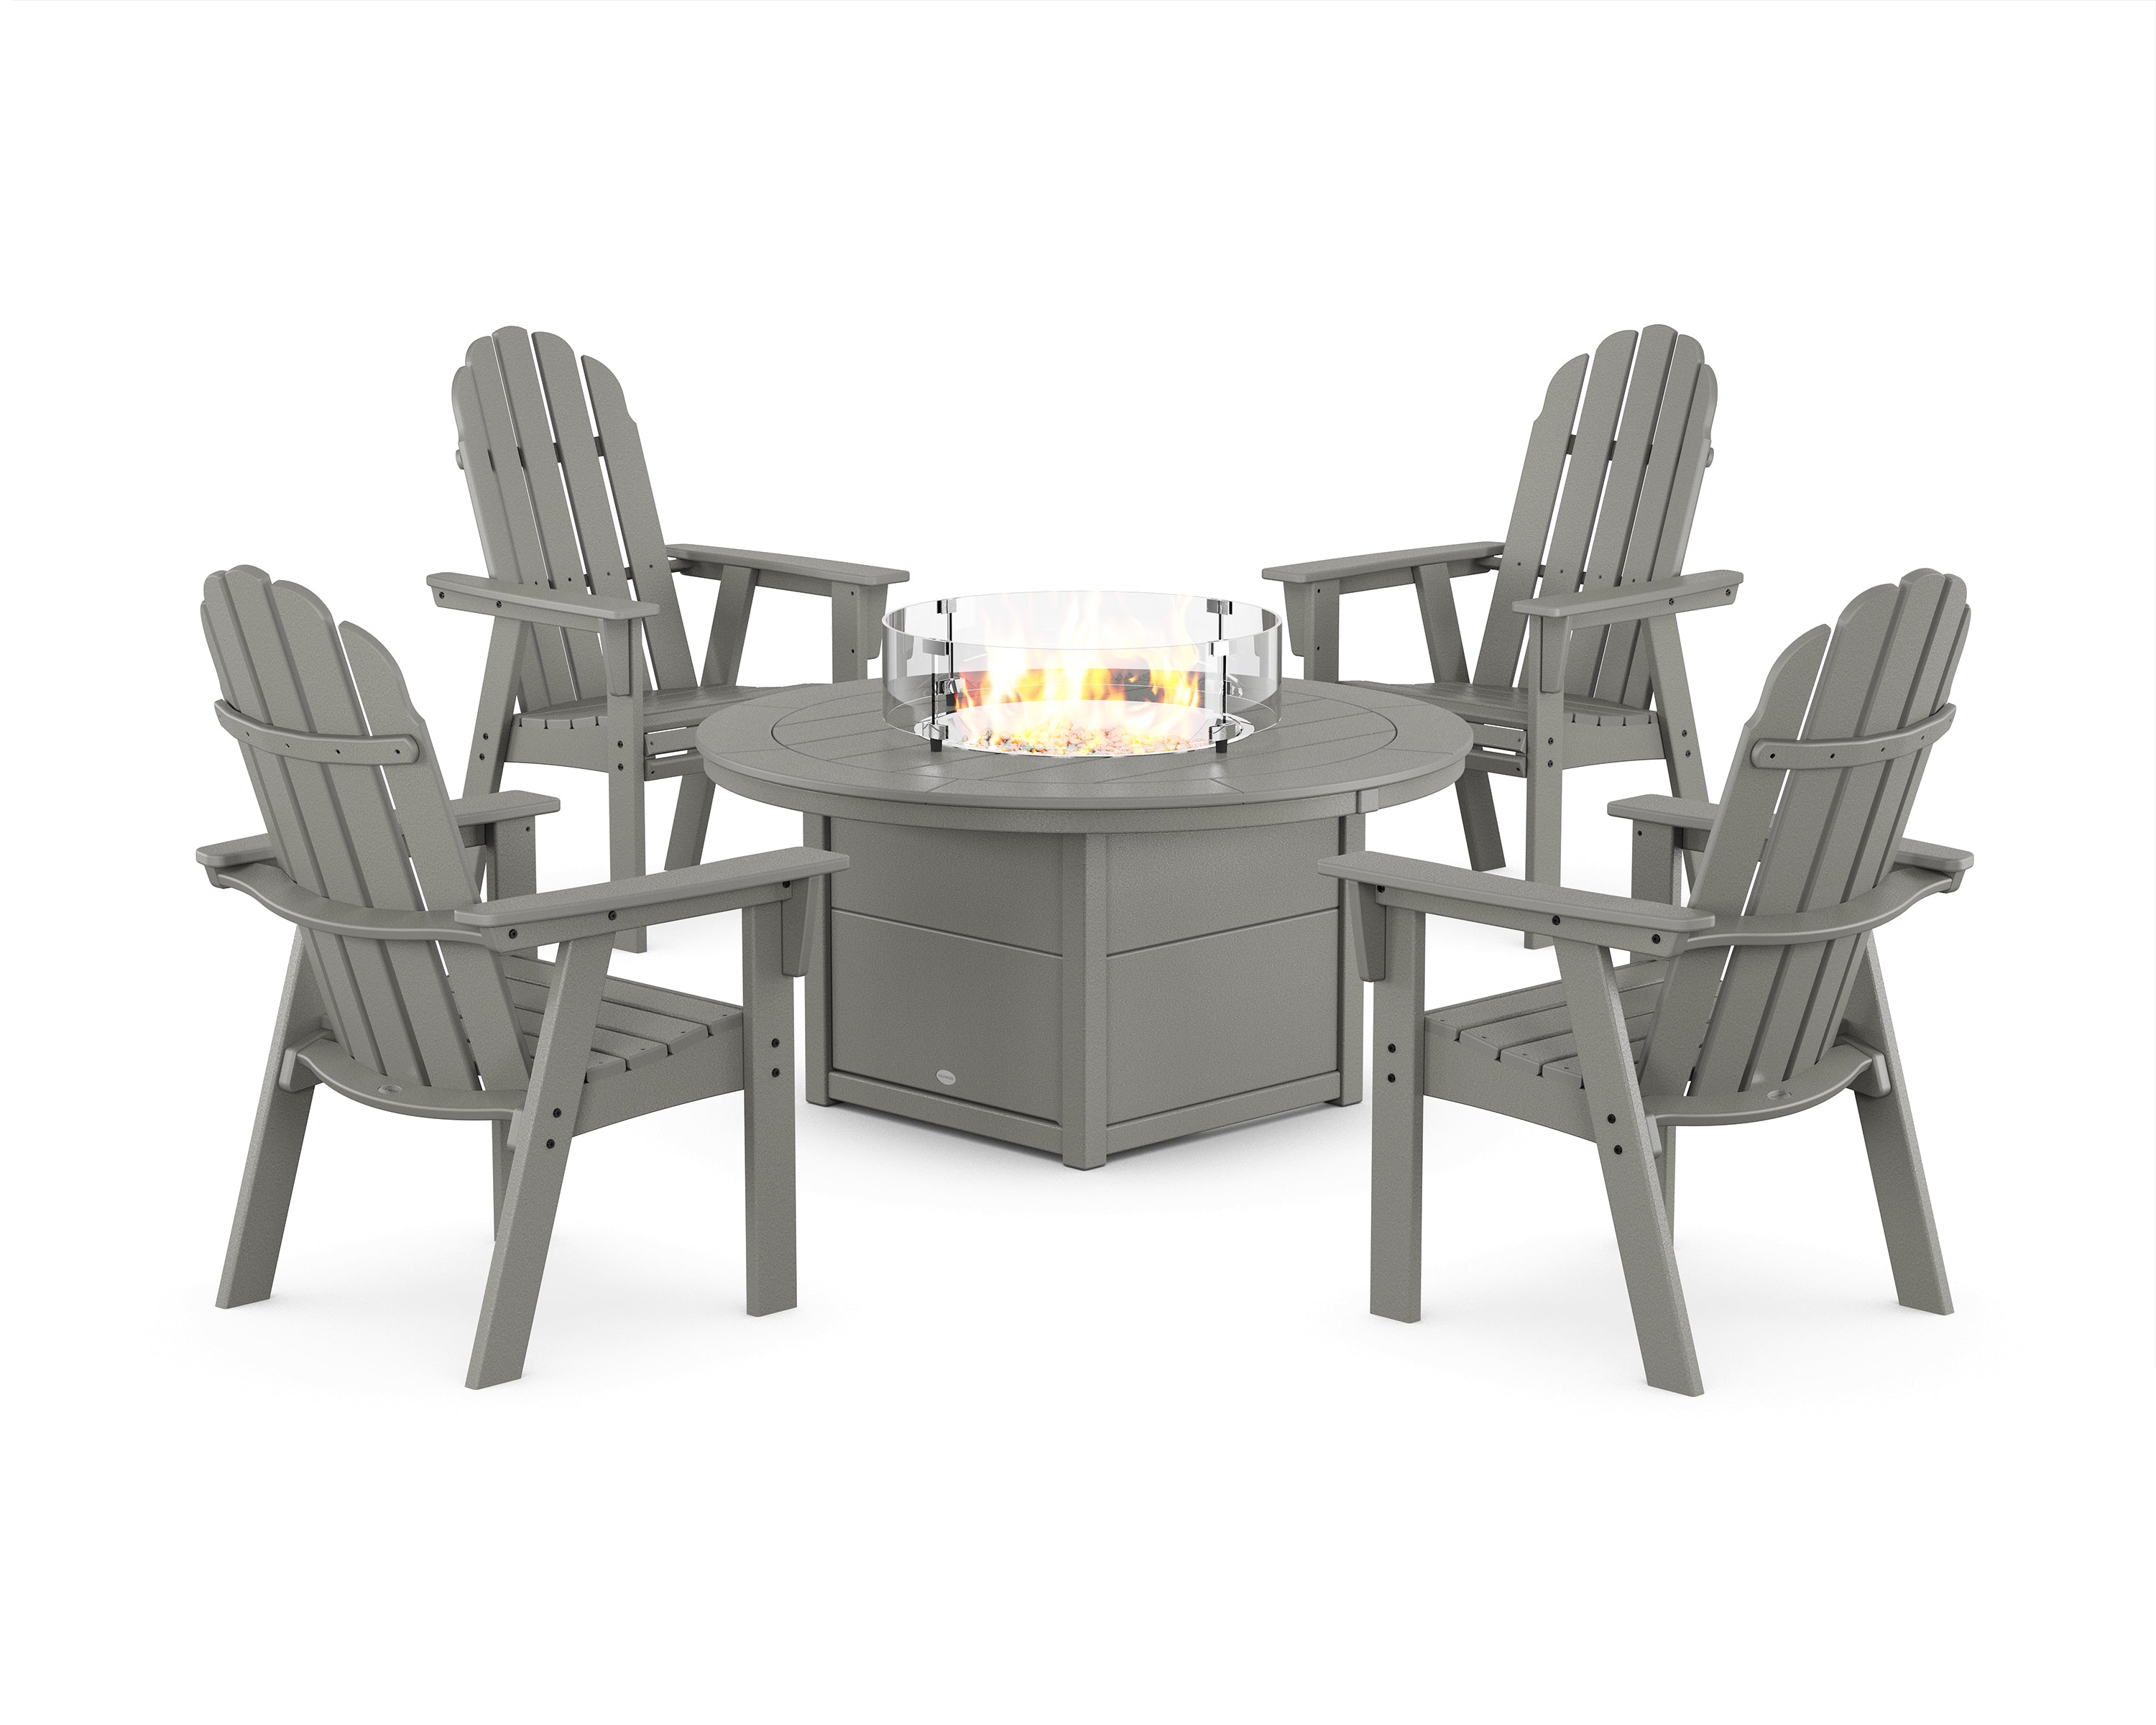 POLYWOOD® Vineyard 4-Piece Curveback Upright Adirondack Conversation Set with Fire Pit Table in Slate Grey